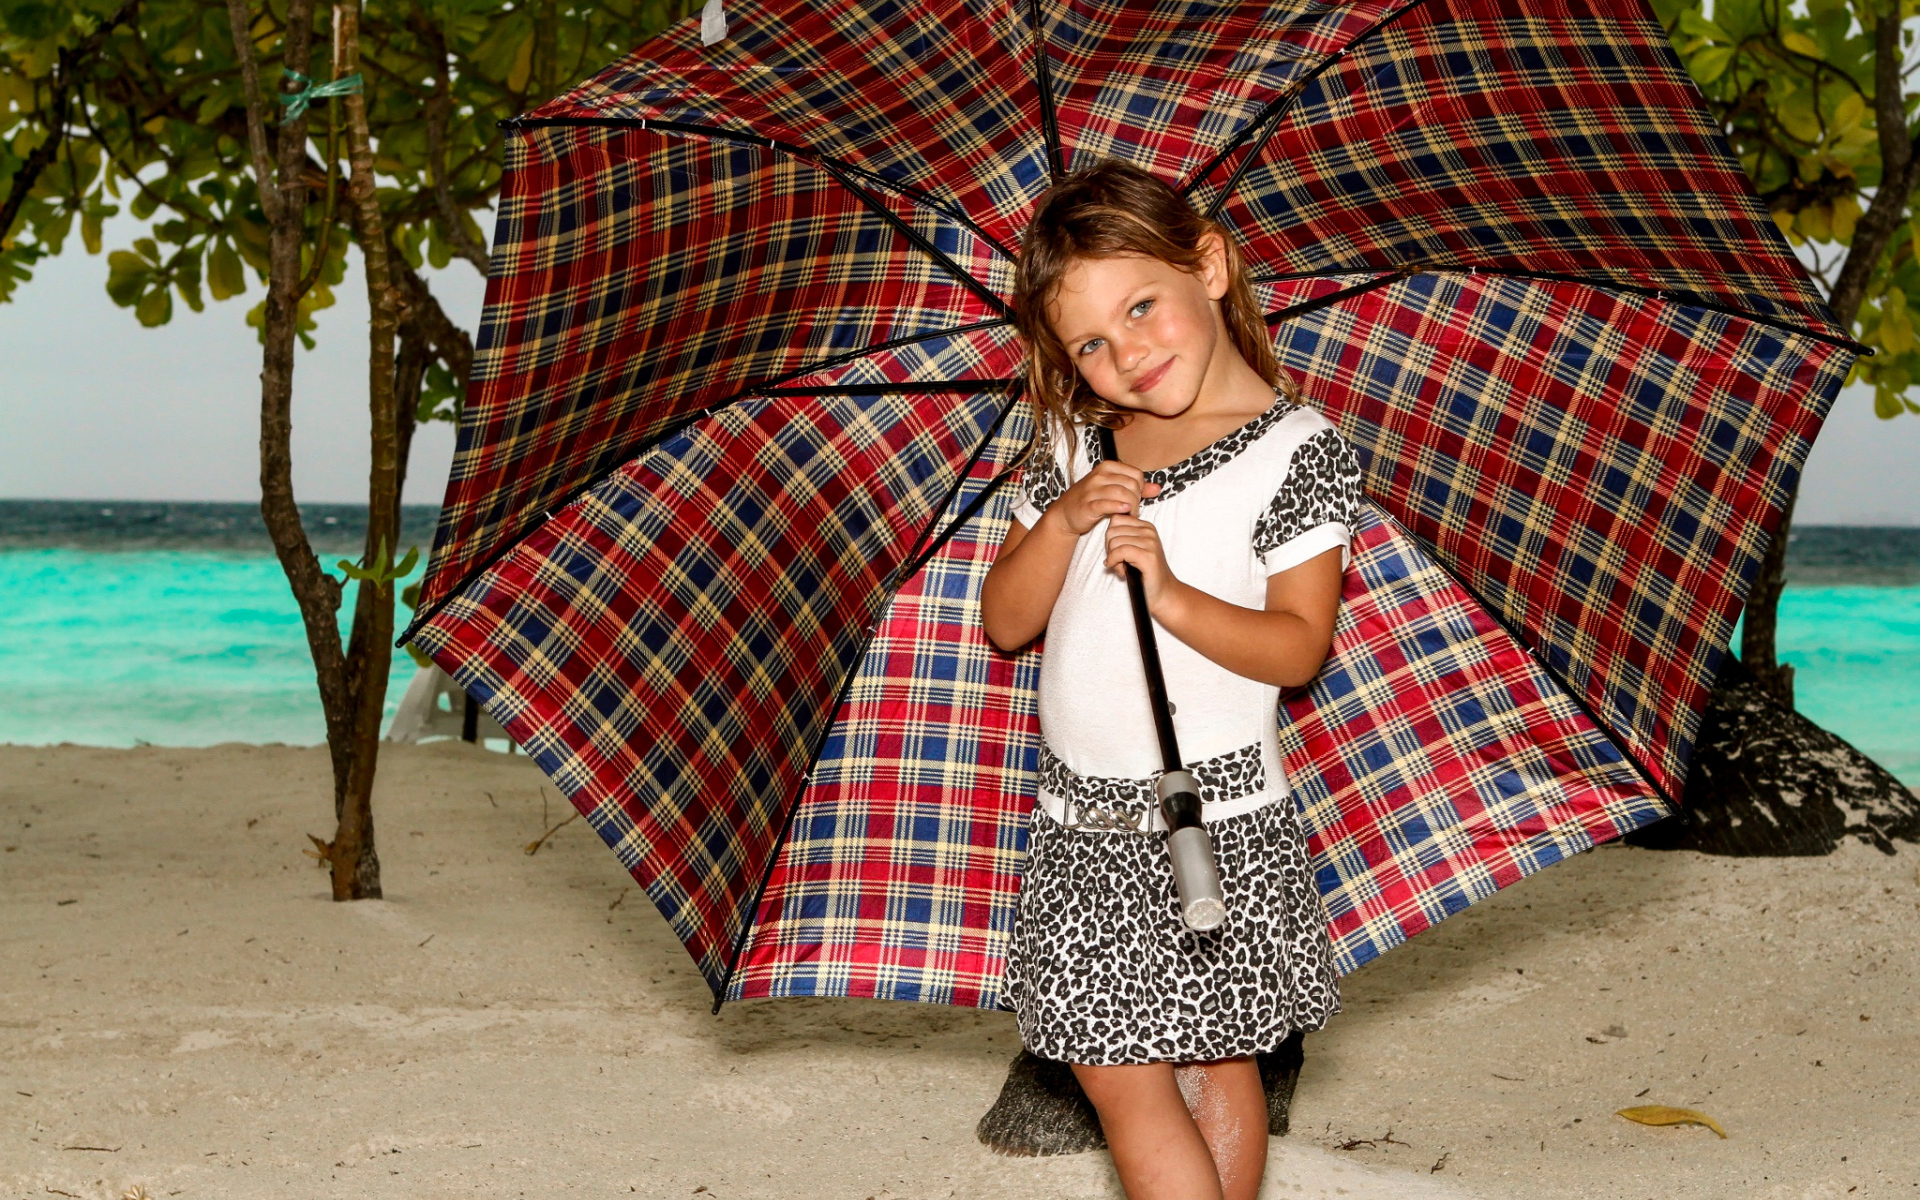 Little girl with a big umbrella